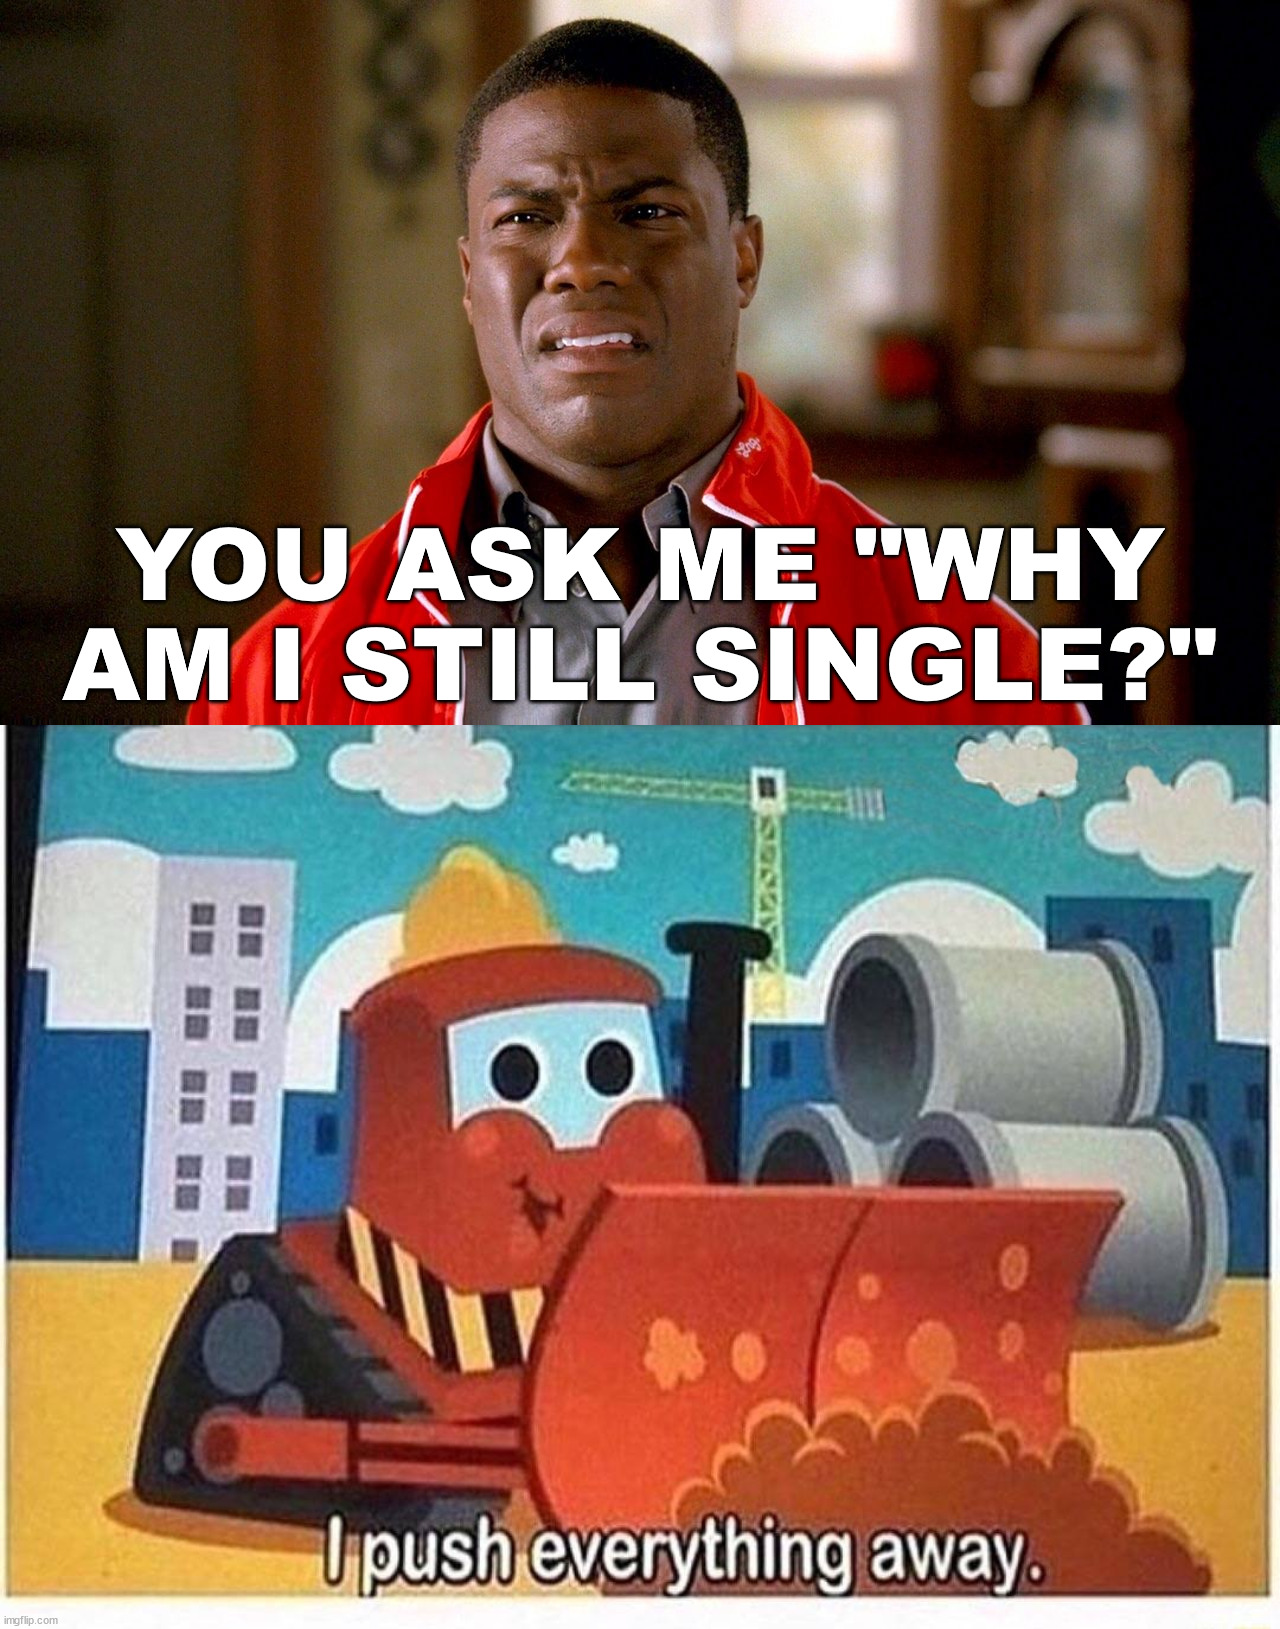 When you are a human bulldozer | YOU ASK ME "WHY AM I STILL SINGLE?" | image tagged in why not stay single,dating,push away | made w/ Imgflip meme maker